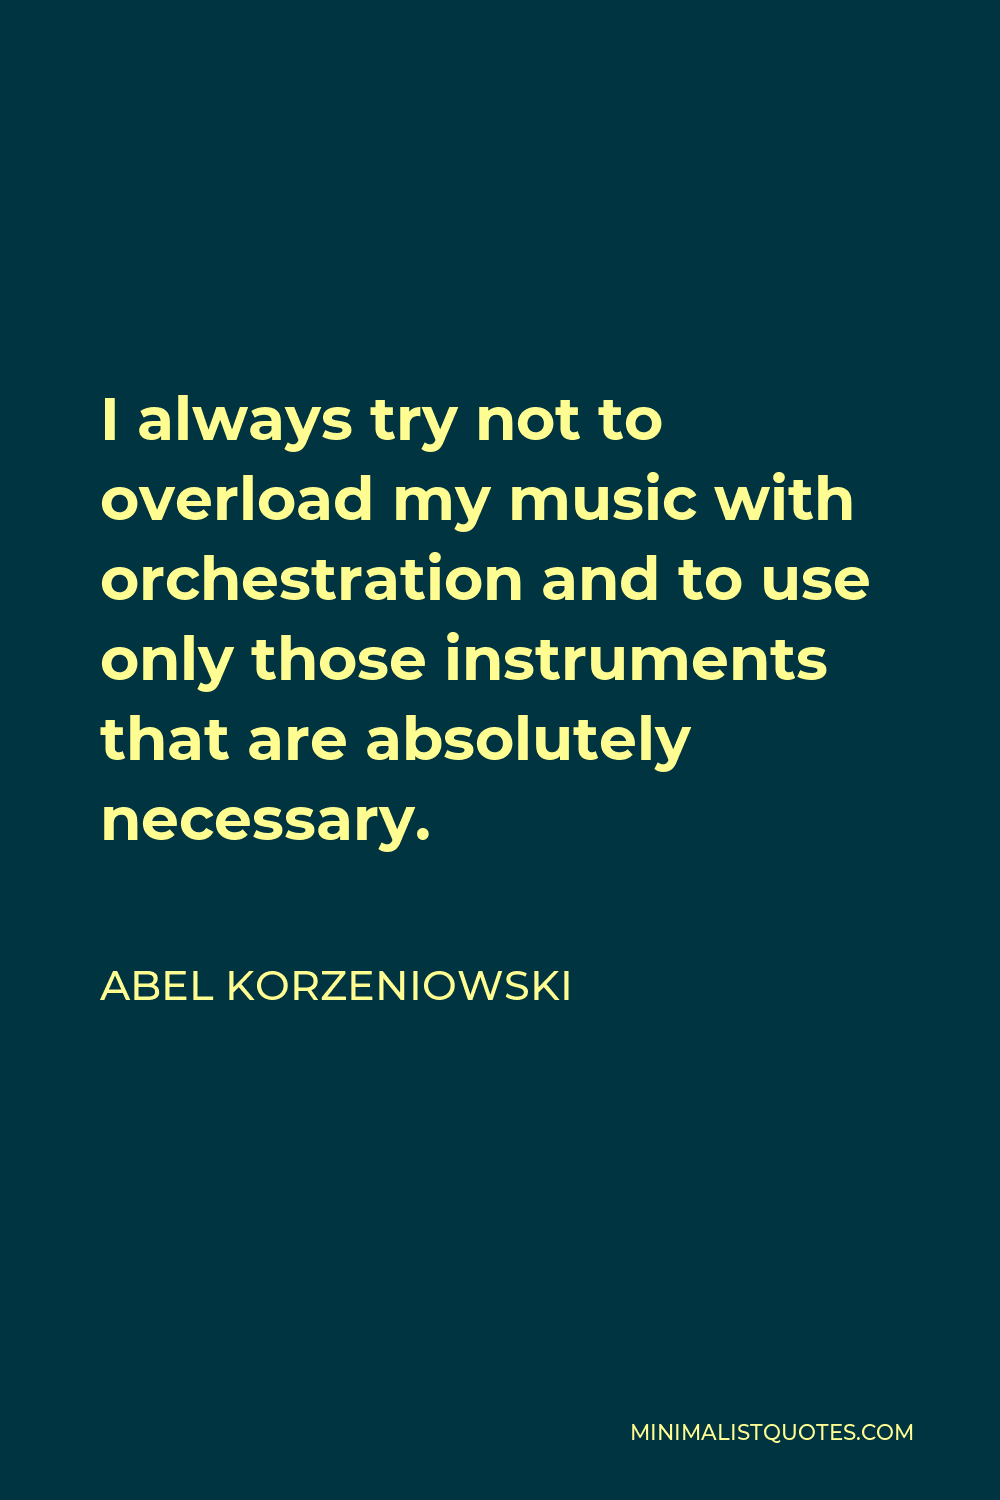 Abel Korzeniowski Quote - I always try not to overload my music with orchestration and to use only those instruments that are absolutely necessary.